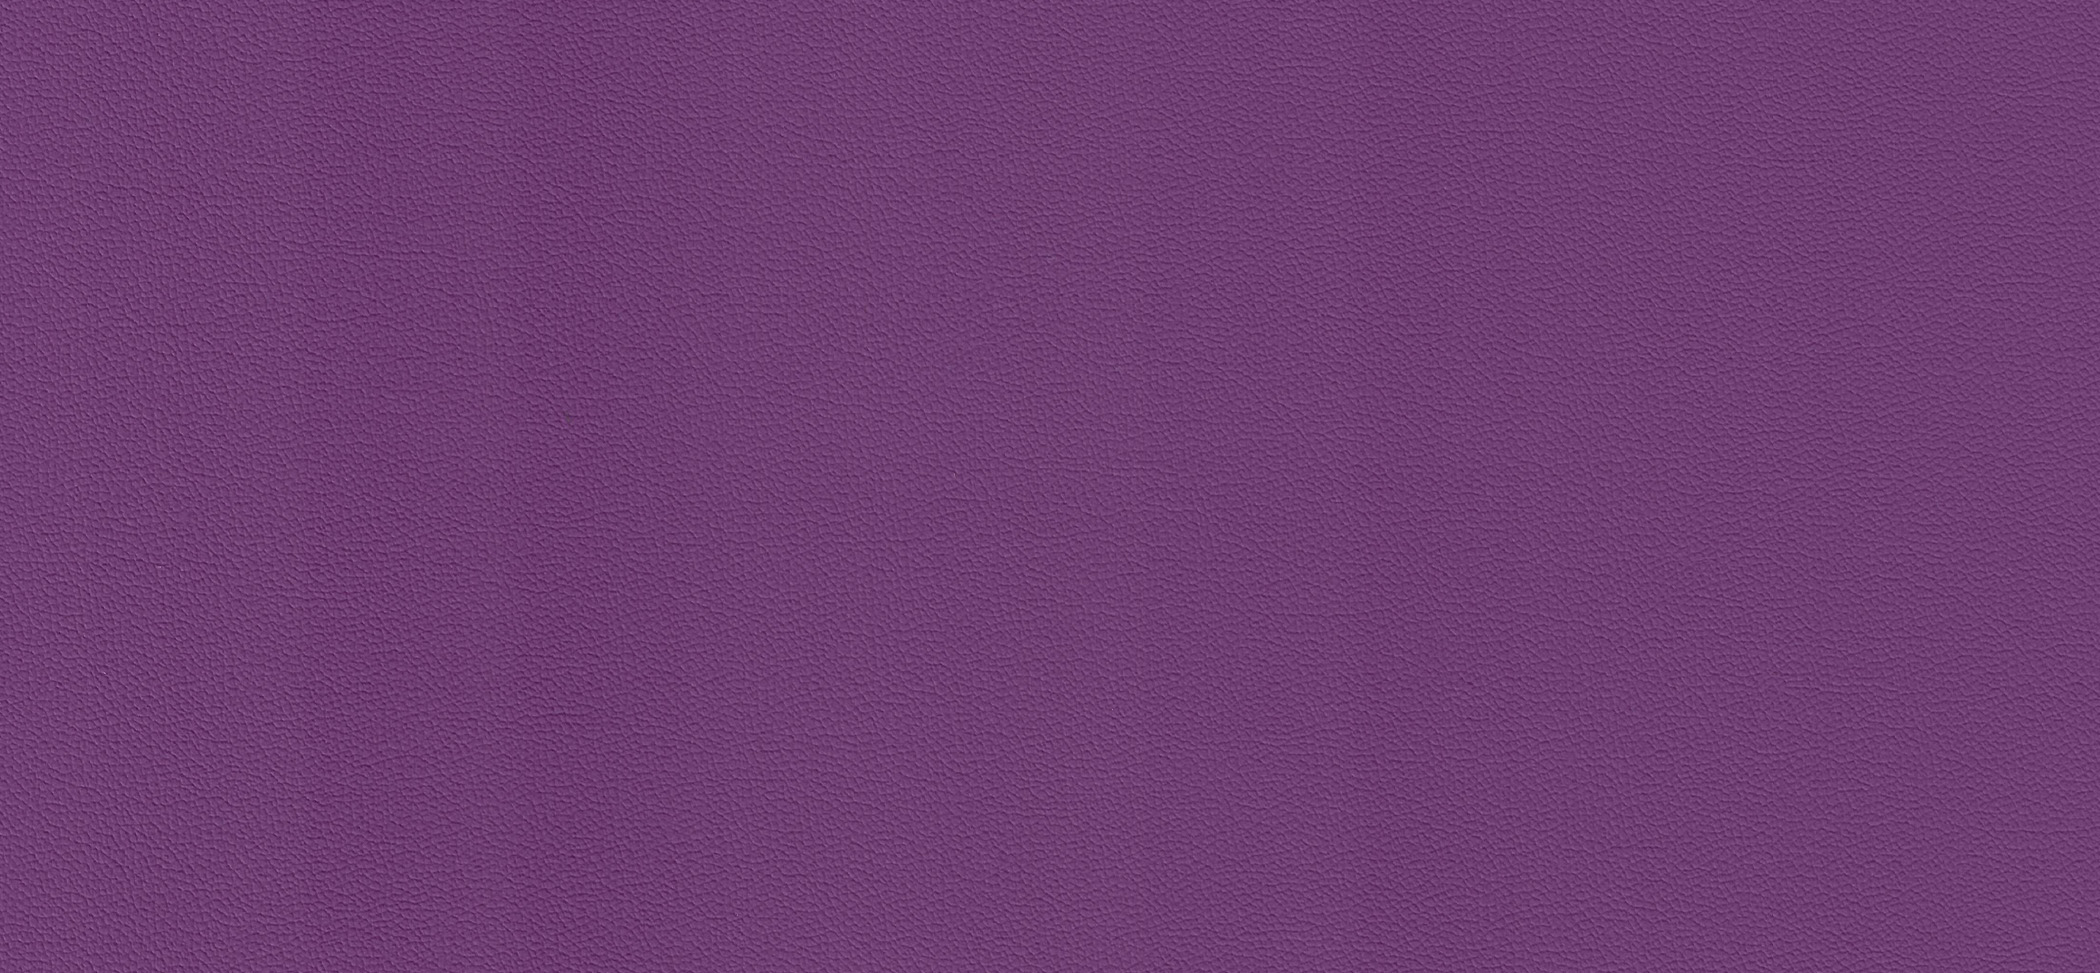 Cleanness purple